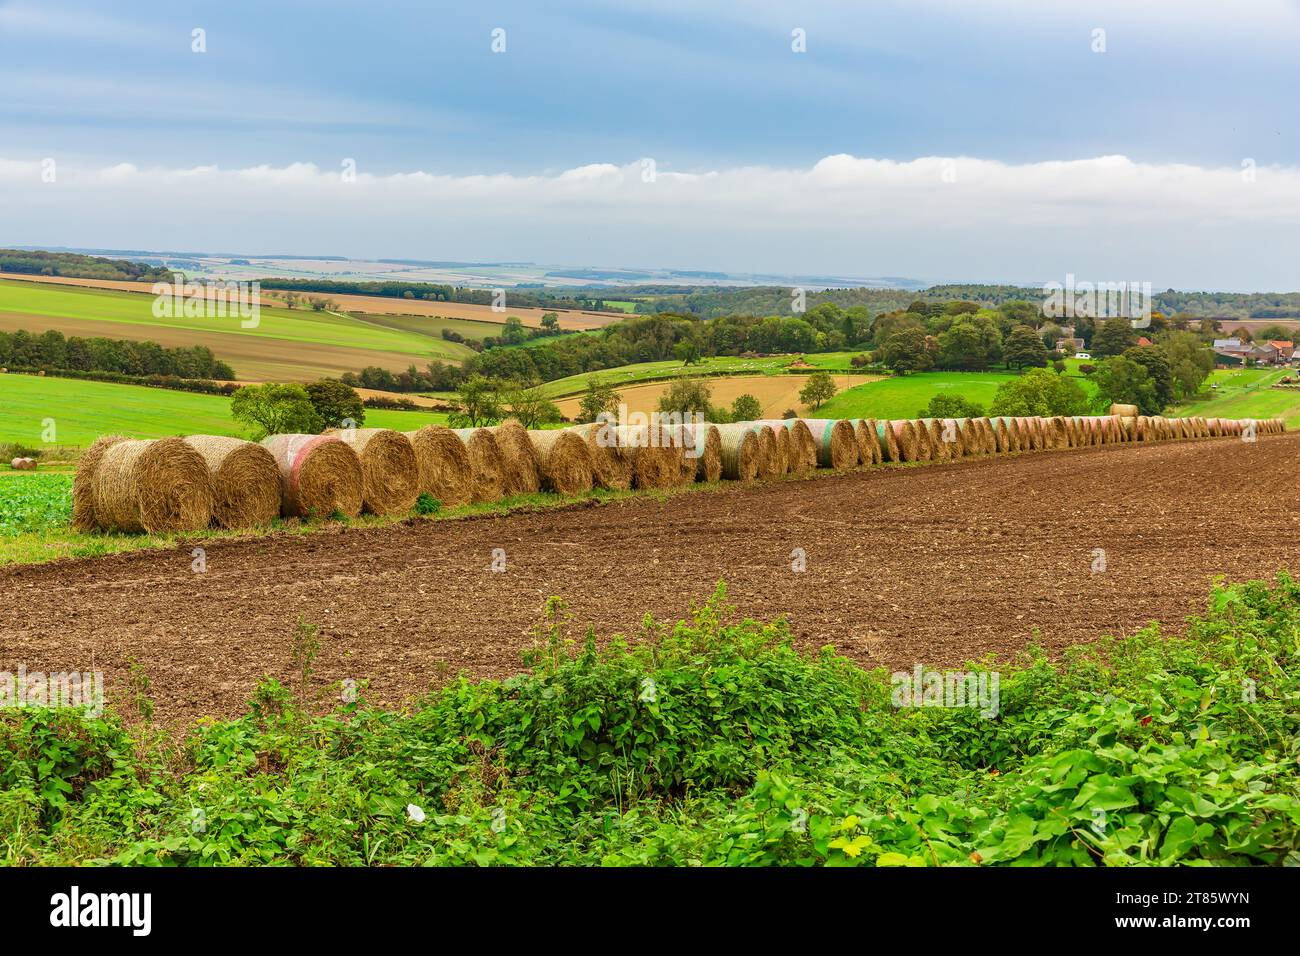 Yorkshire Wolds, East Yorkshire.  A rural scene with rich, fertile fields and a long, neat row of large rolled bales of straw in Autumn.  Horizontal, Stock Photo